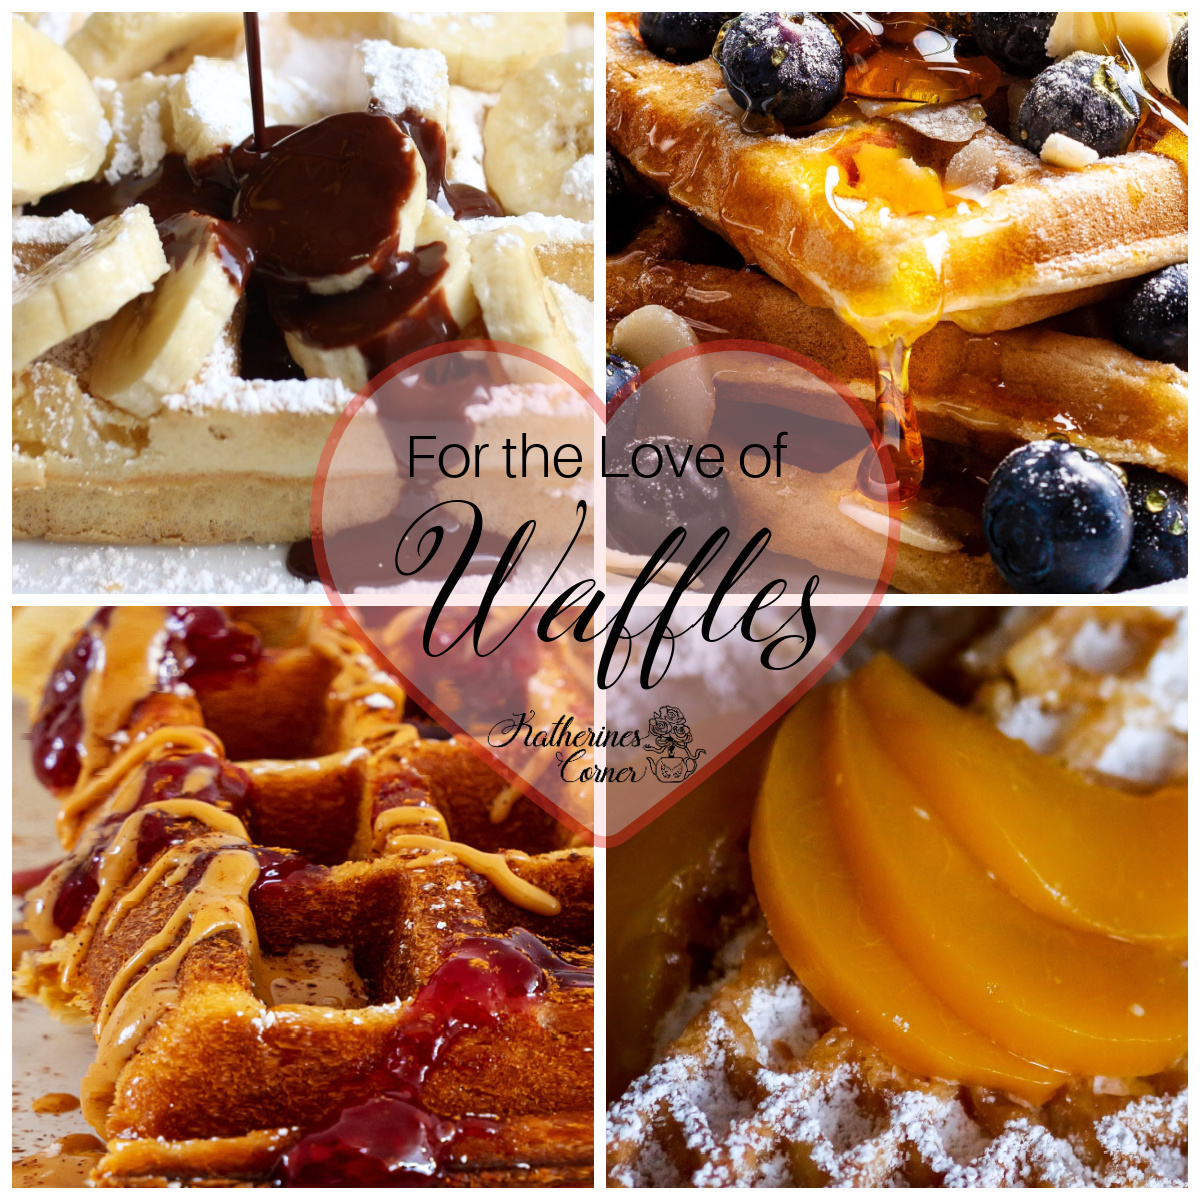 For the Love of Waffles